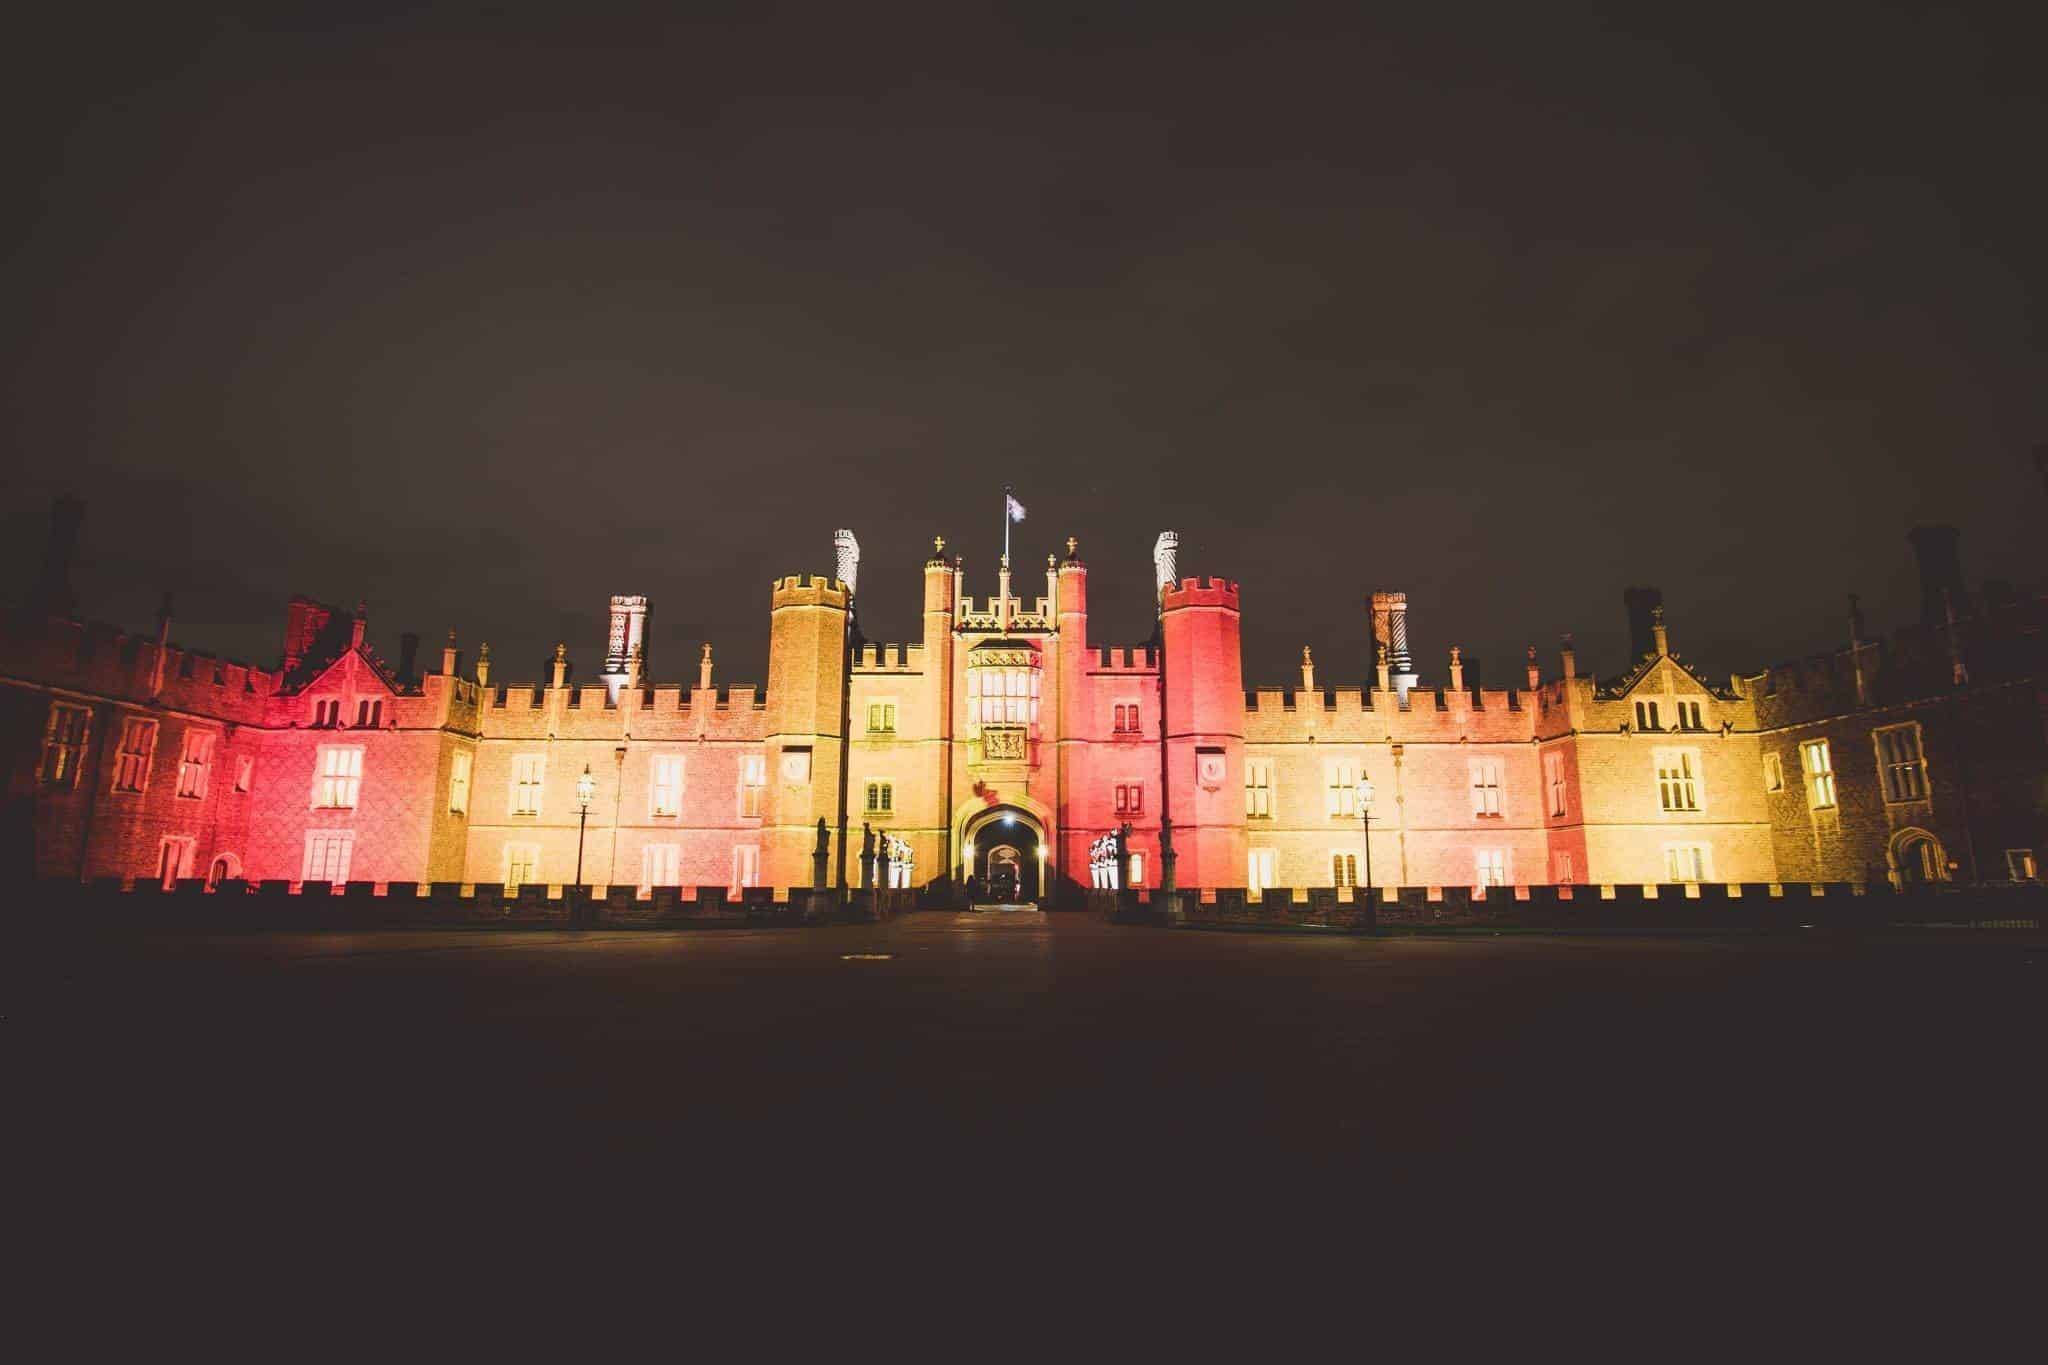 A perfectly historic evening at Hampton Court Palace